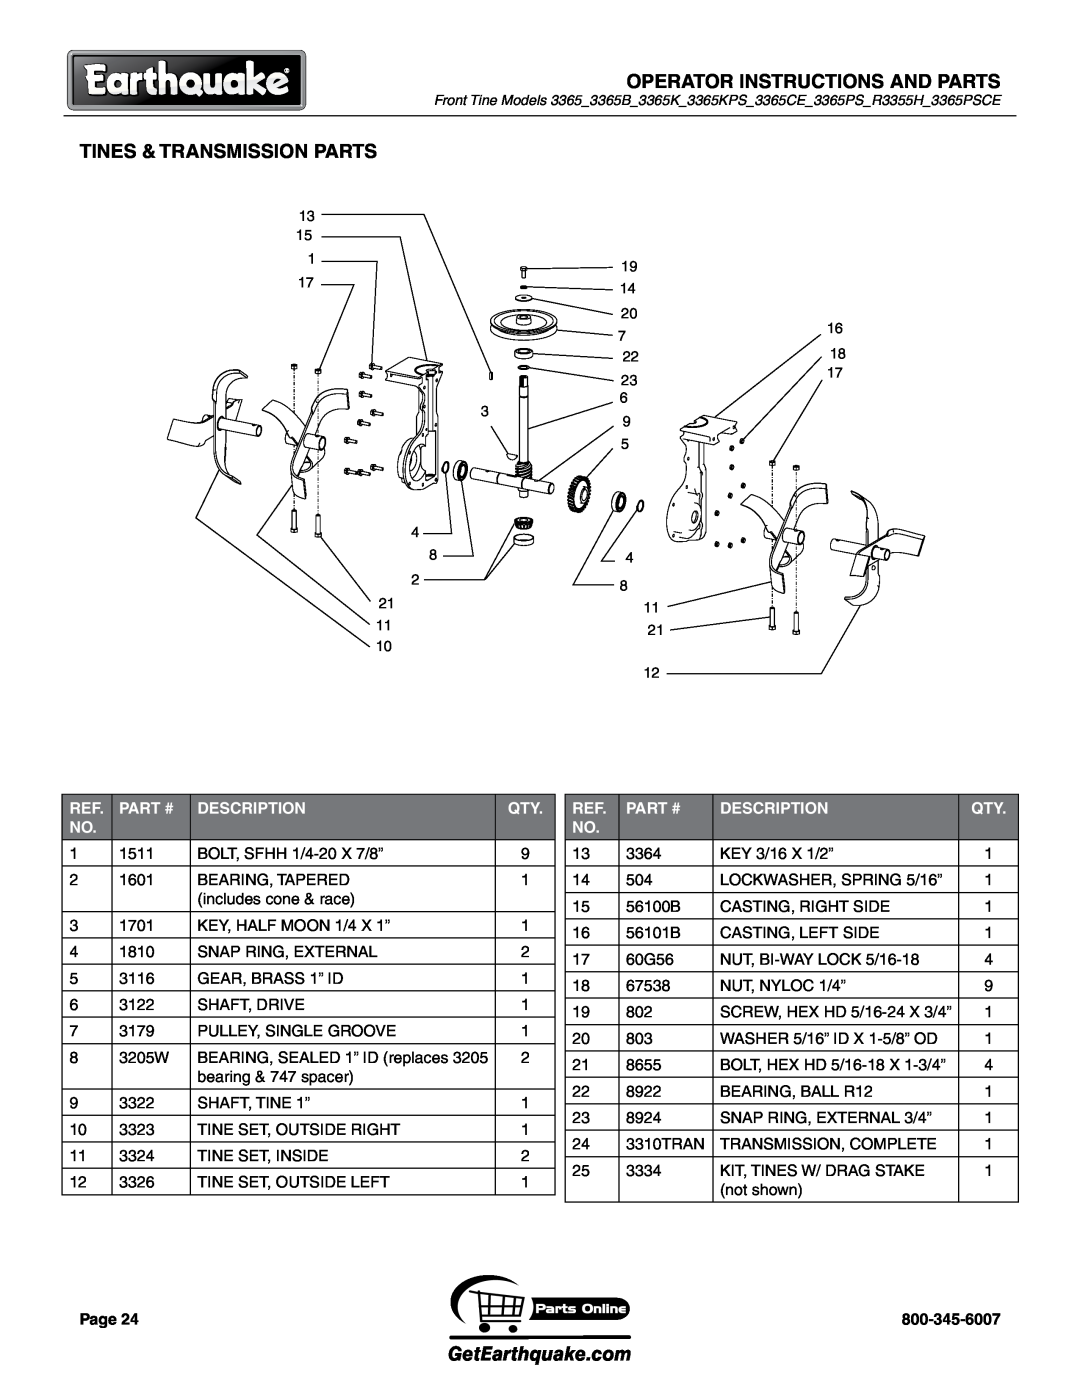 EarthQuake R3355H tines & transmission PARTS, OPERATor INSTRUCTIONS and parts, GetEarthquake.com, Part #, Description 